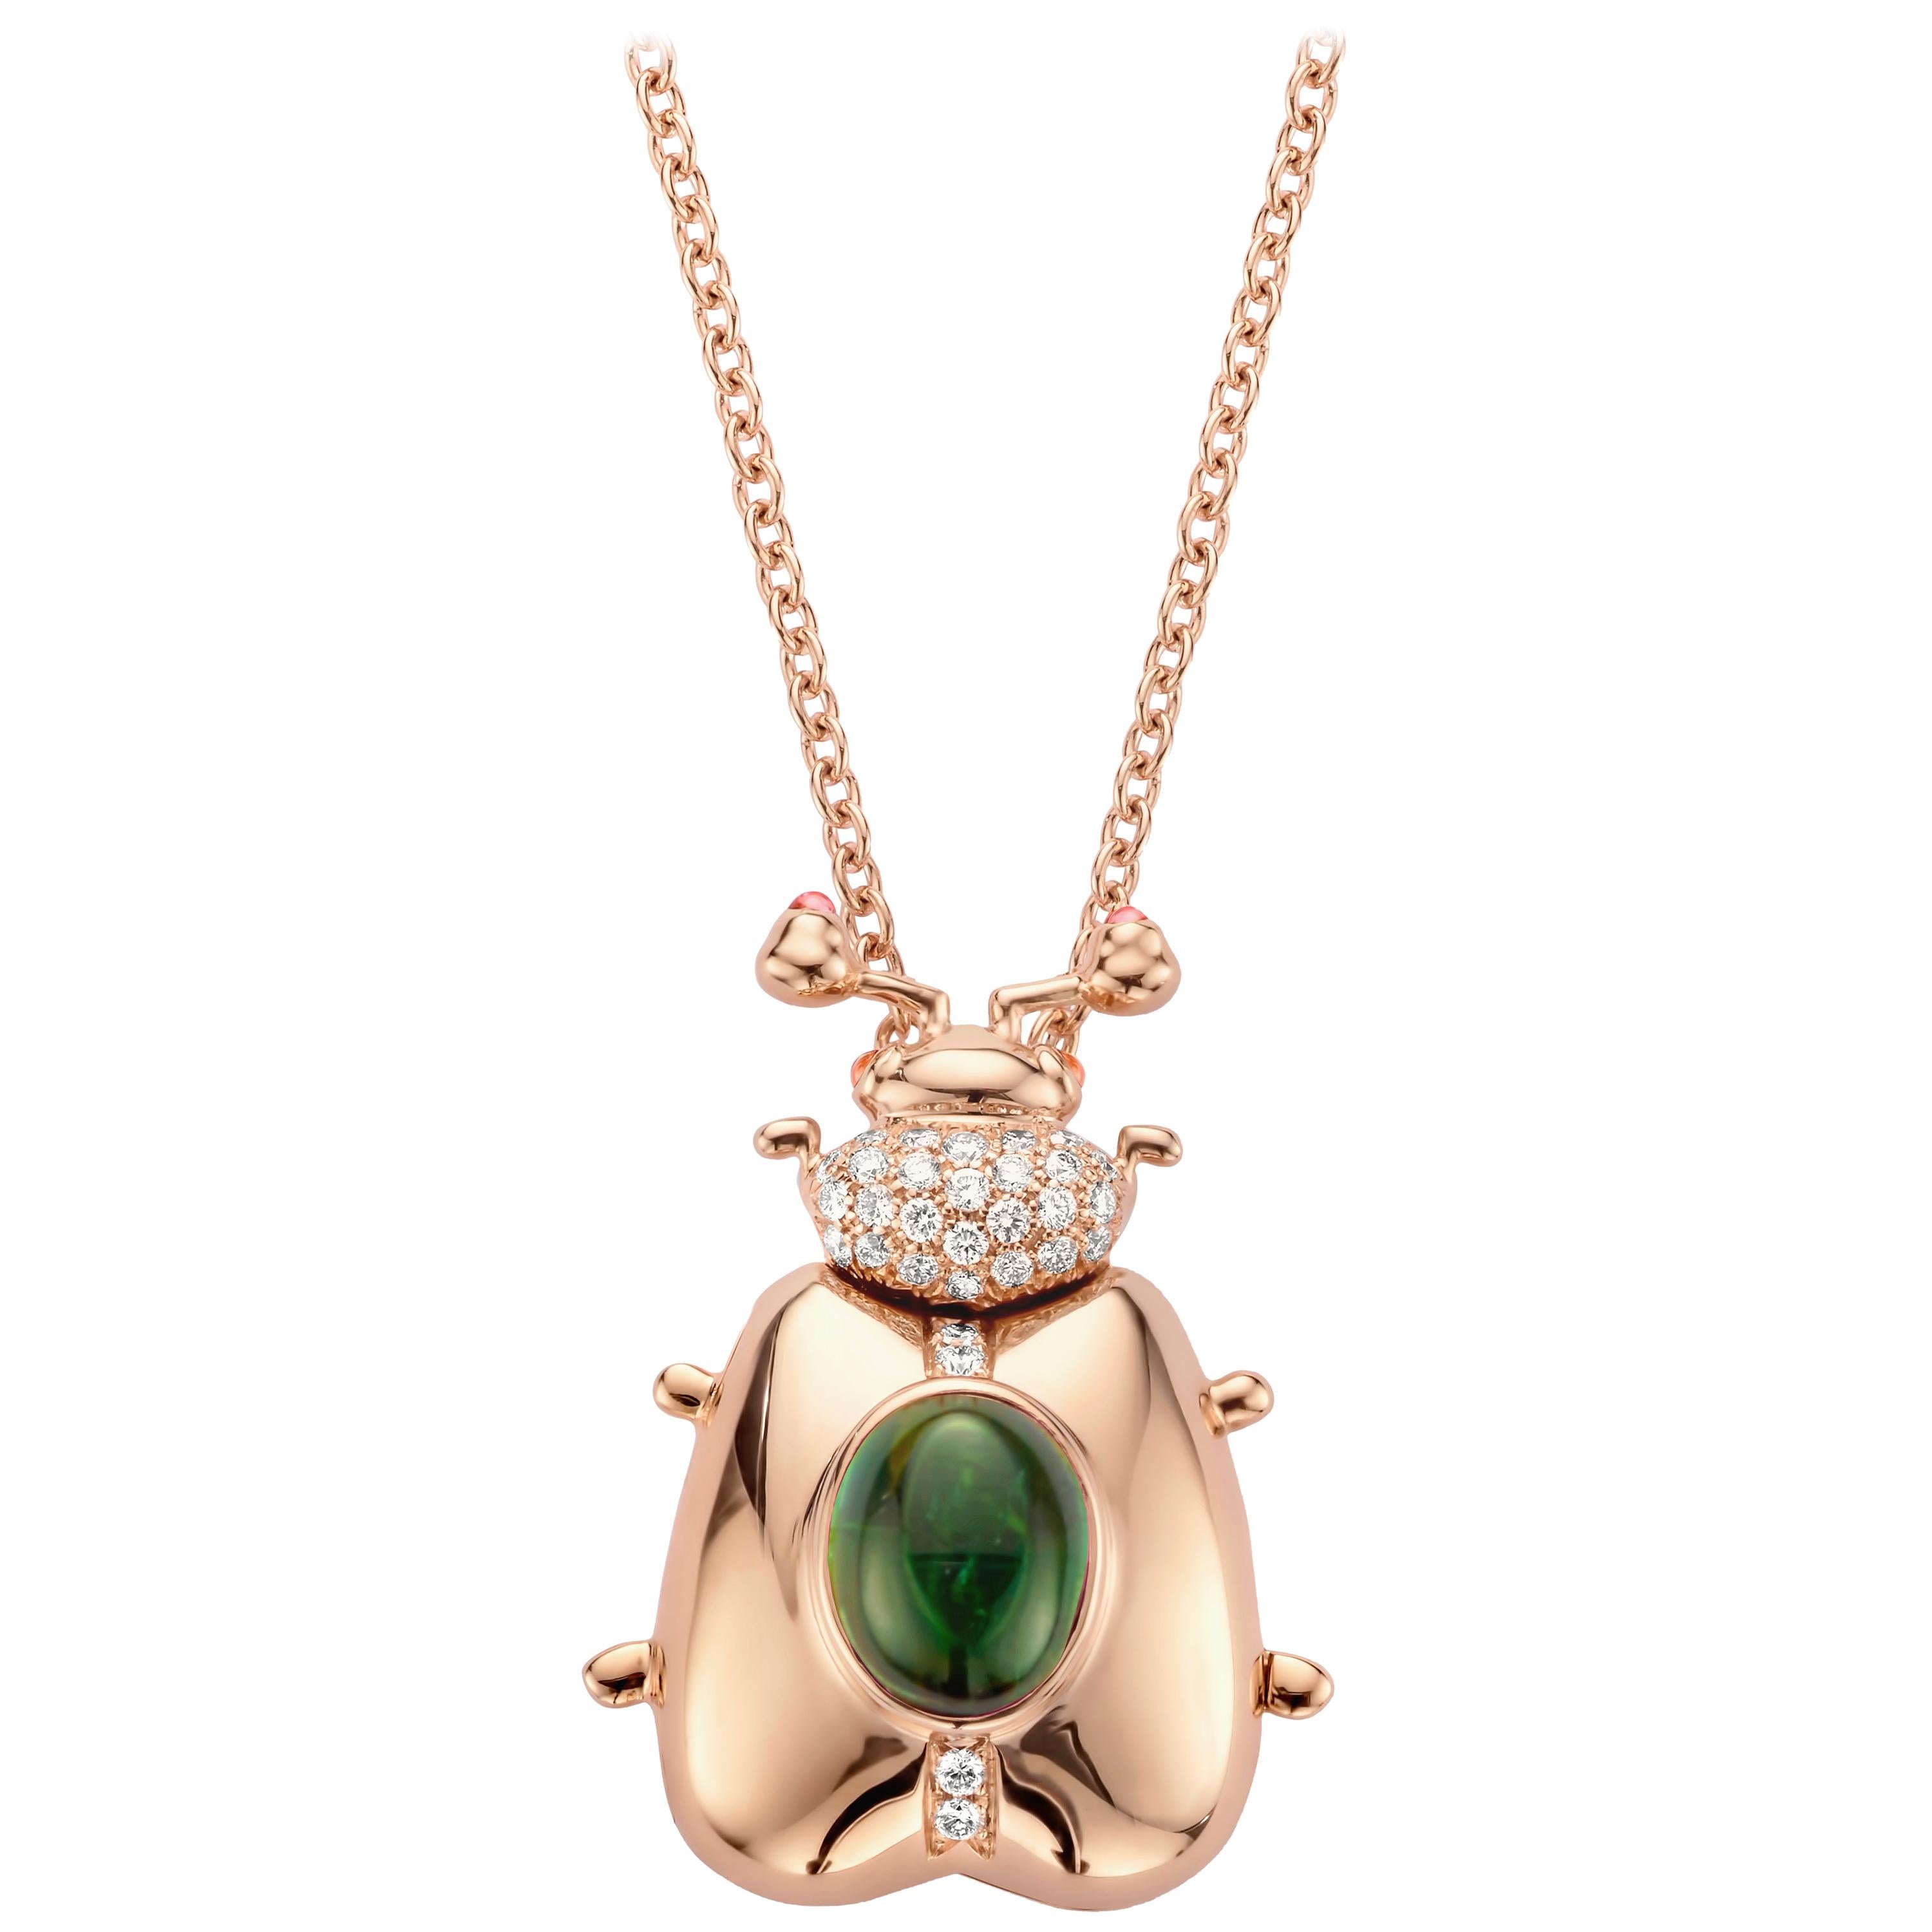 One of a kind lucky beetle necklace in 18 Karat rose gold 16g set with the finest diamonds in brilliant cut 0,31Ct (VVS/DEF quality) and one natural, green tourmaline in oval cabochon cut 2,00Ct. 

The feelers and the eyes of this beautiful golden